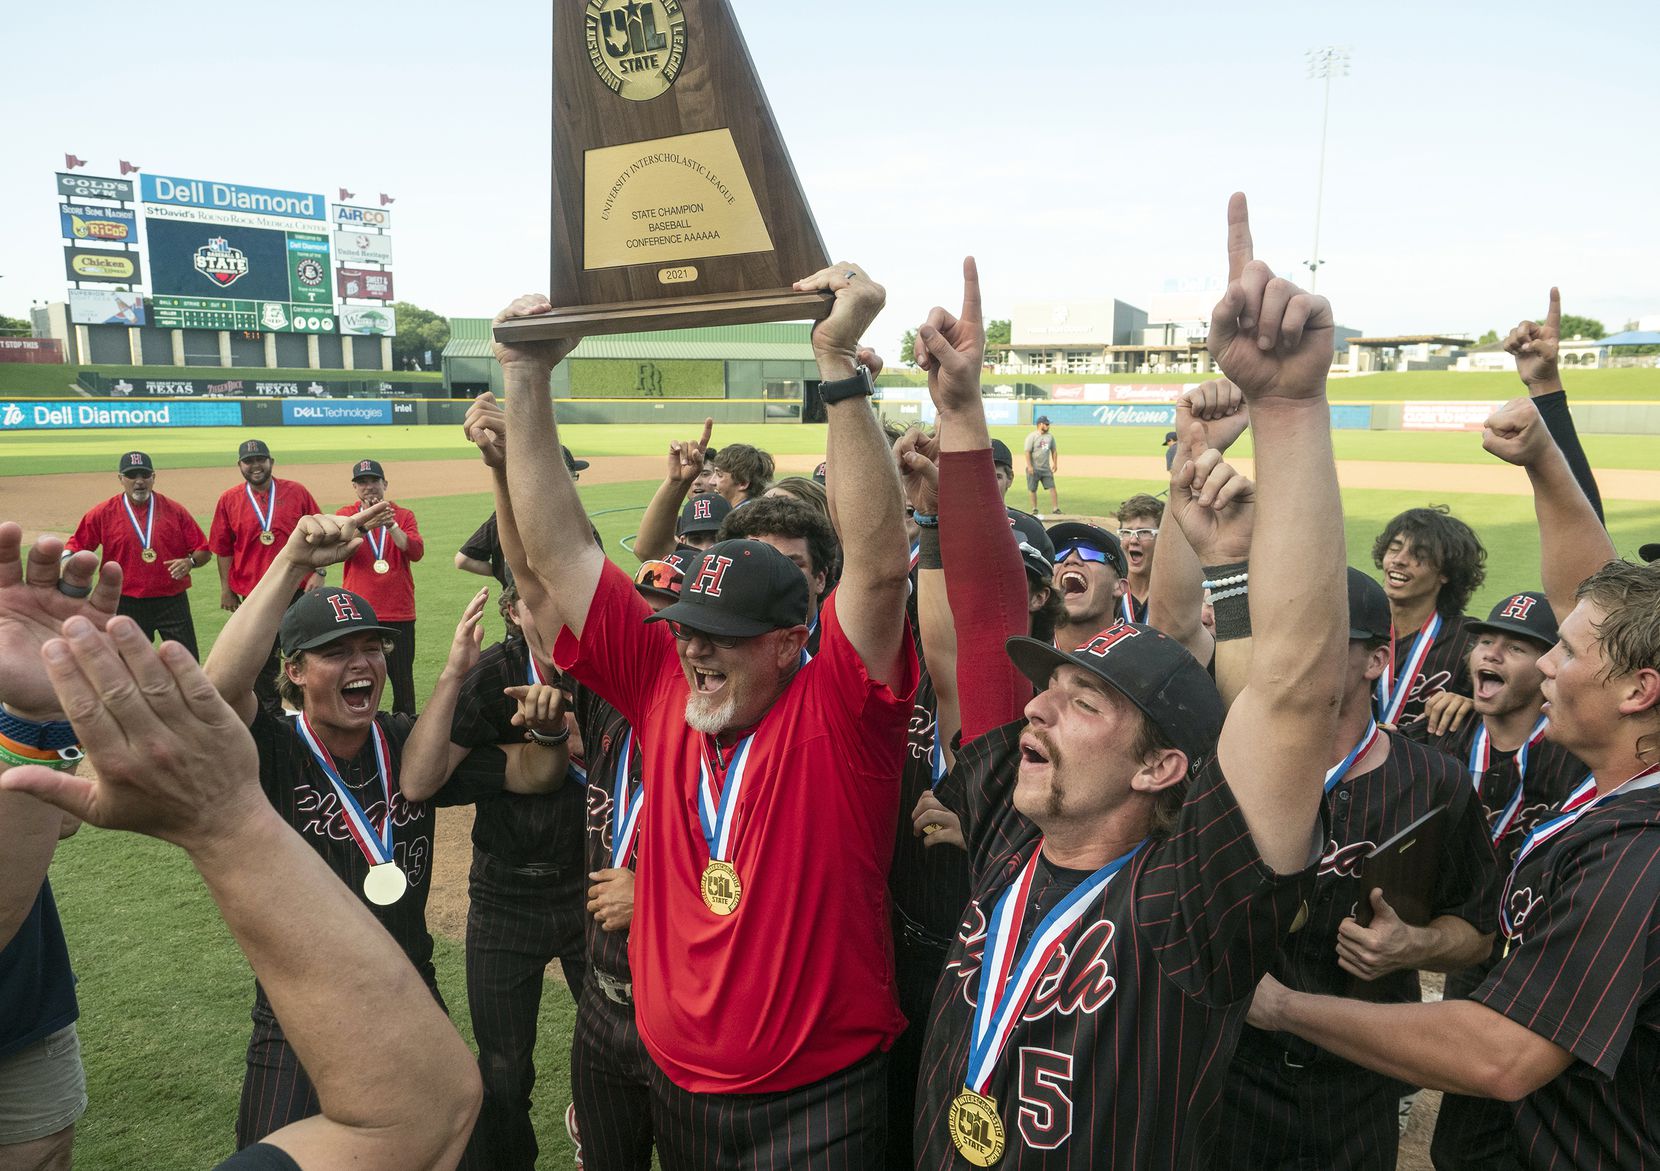 Rockwall-Heath head coach, Greg Harvey and the team celebrate with the championship trophy after defeating Keller in the 2021 UIL 6A state baseball final held, Saturday, June 12, 2021, in Round Rock, Texas.  Rockwall-Heath defeated Keller 4-3.   (Rodolfo Gonzalez/Special Contributor) 